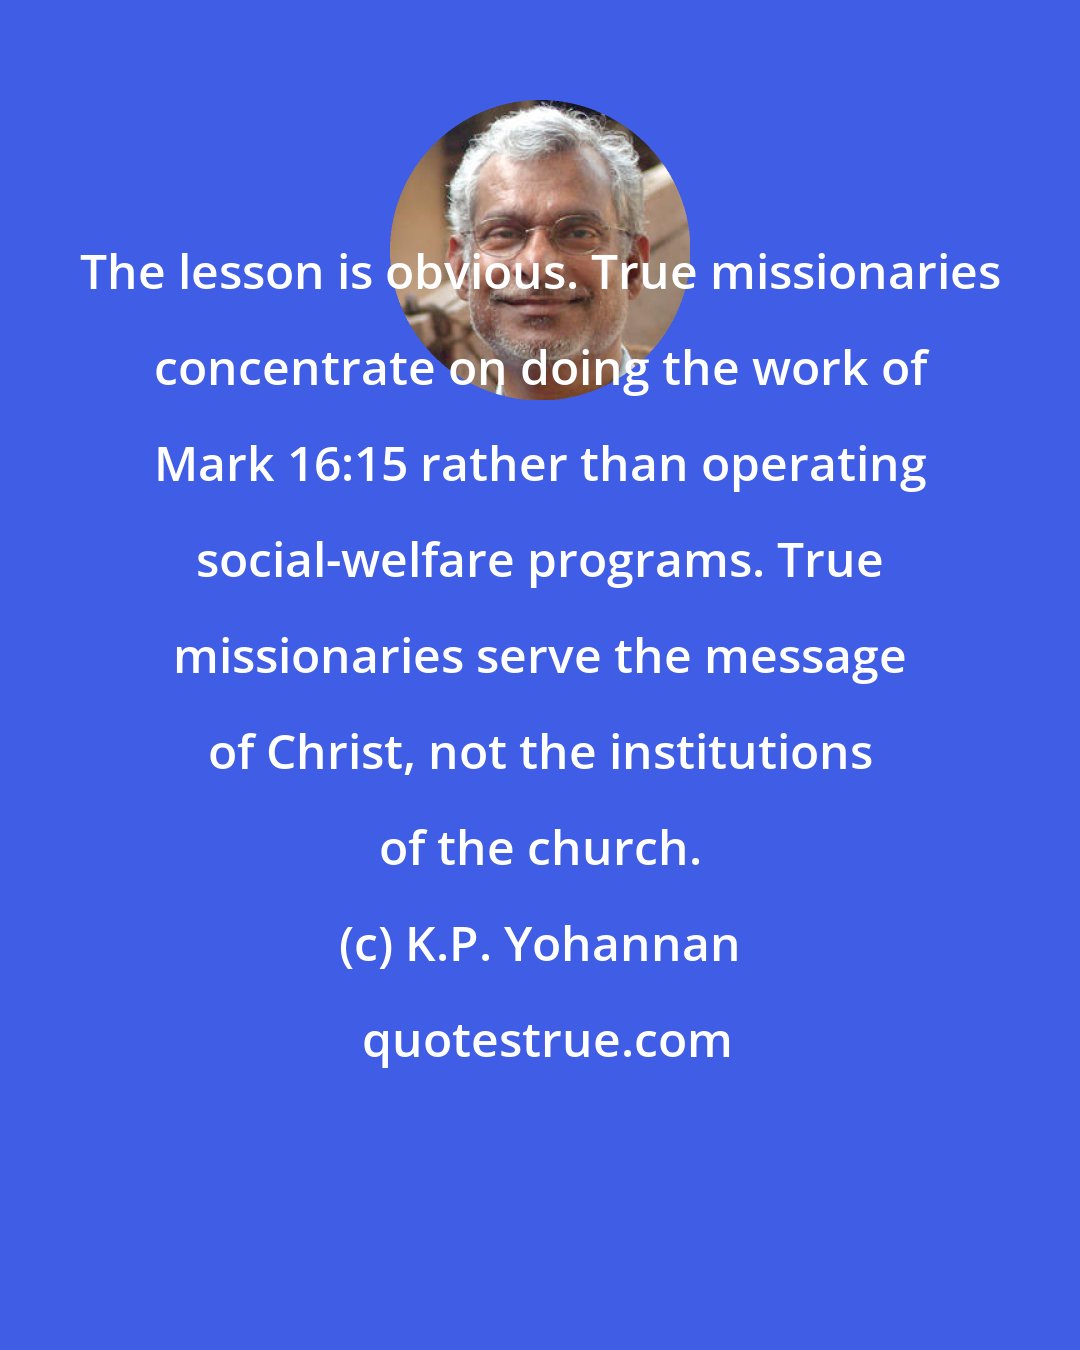 K.P. Yohannan: The lesson is obvious. True missionaries concentrate on doing the work of Mark 16:15 rather than operating social-welfare programs. True missionaries serve the message of Christ, not the institutions of the church.